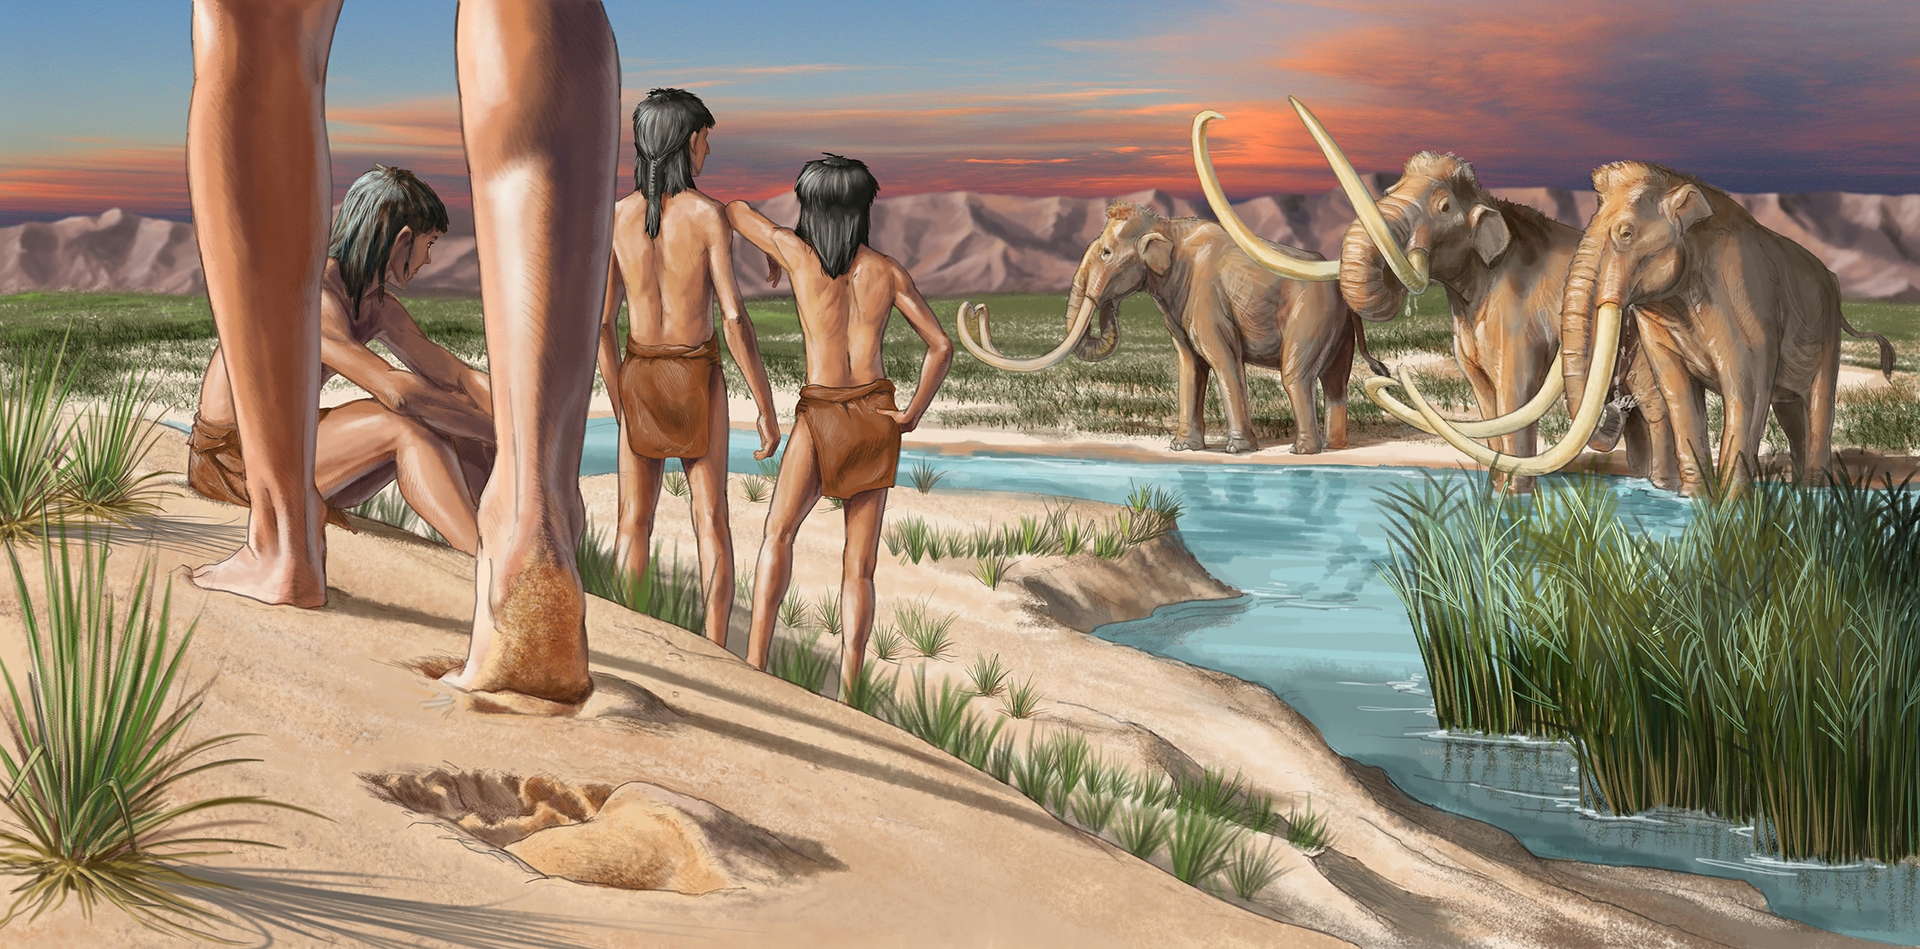 painting of shirtless boys staring at 3 mammoths in the water